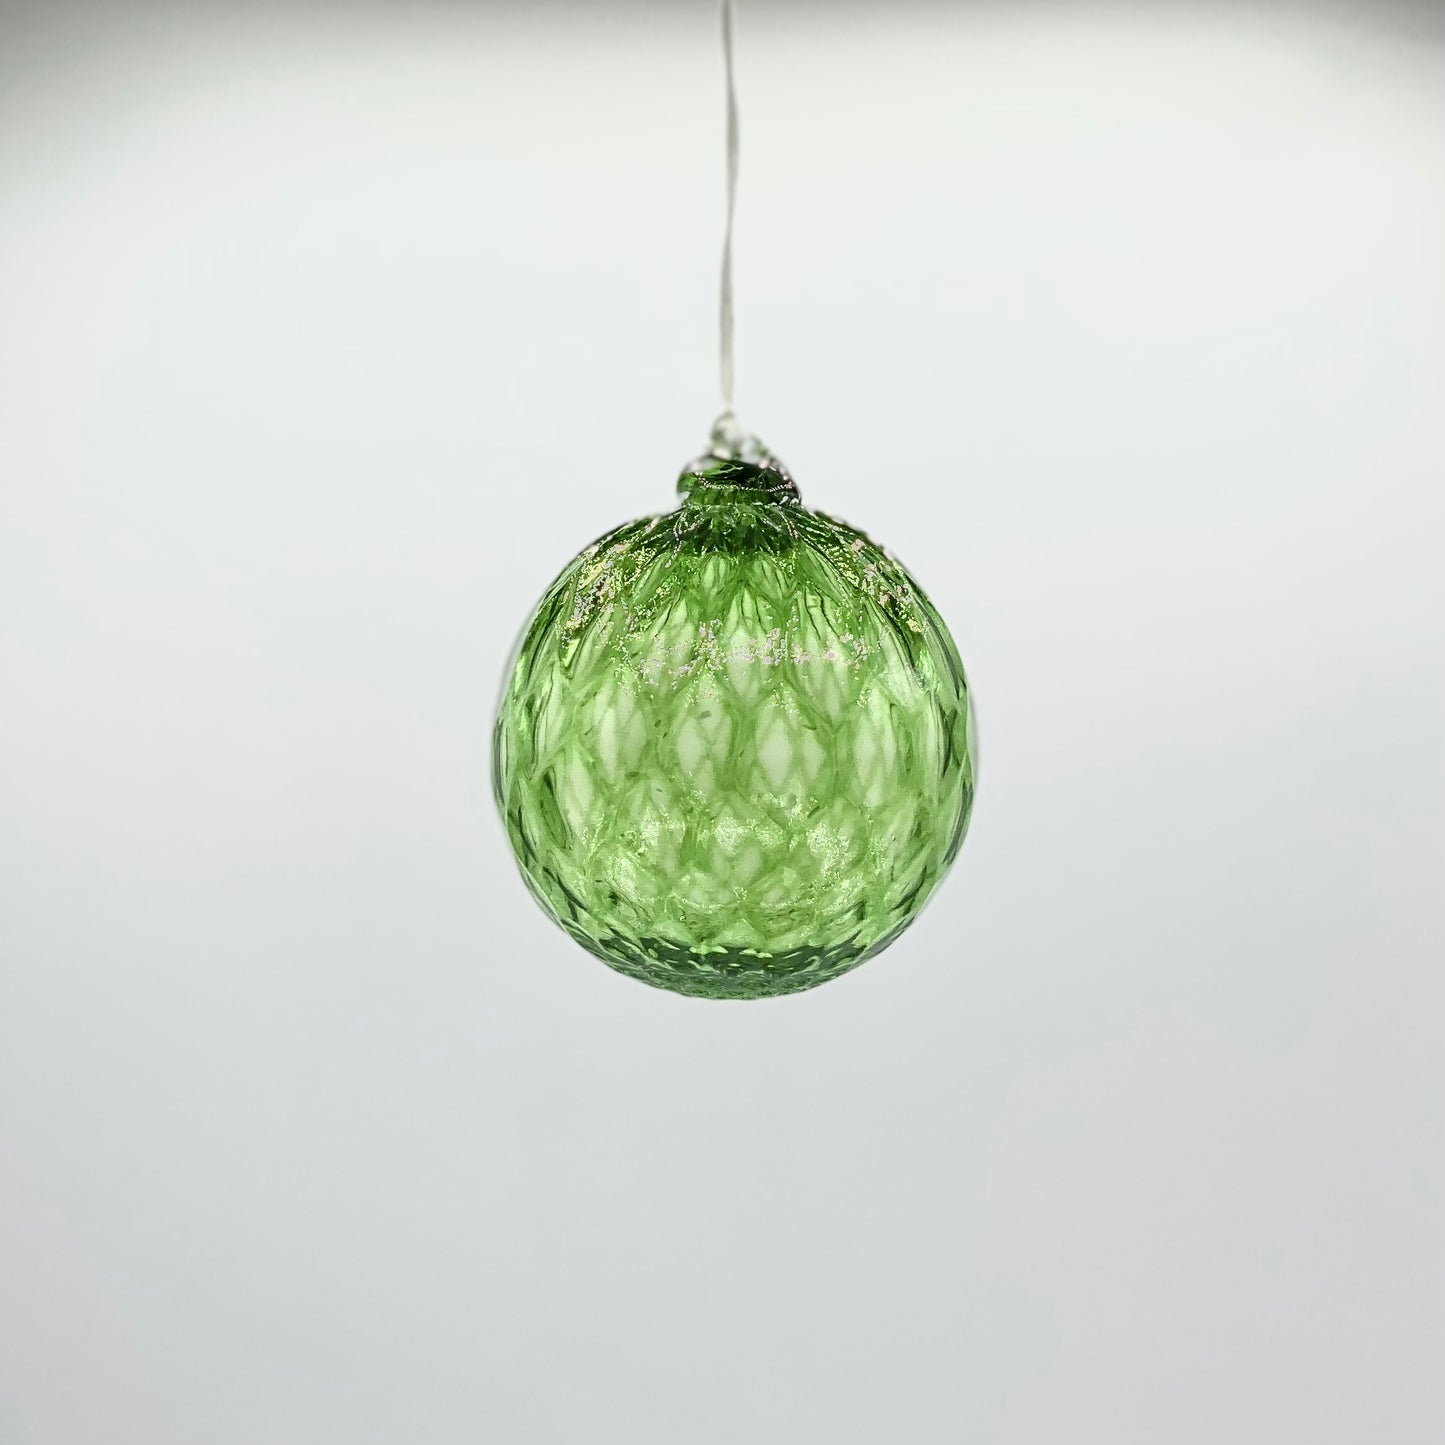 Small Ball Ornament by Glass Roots